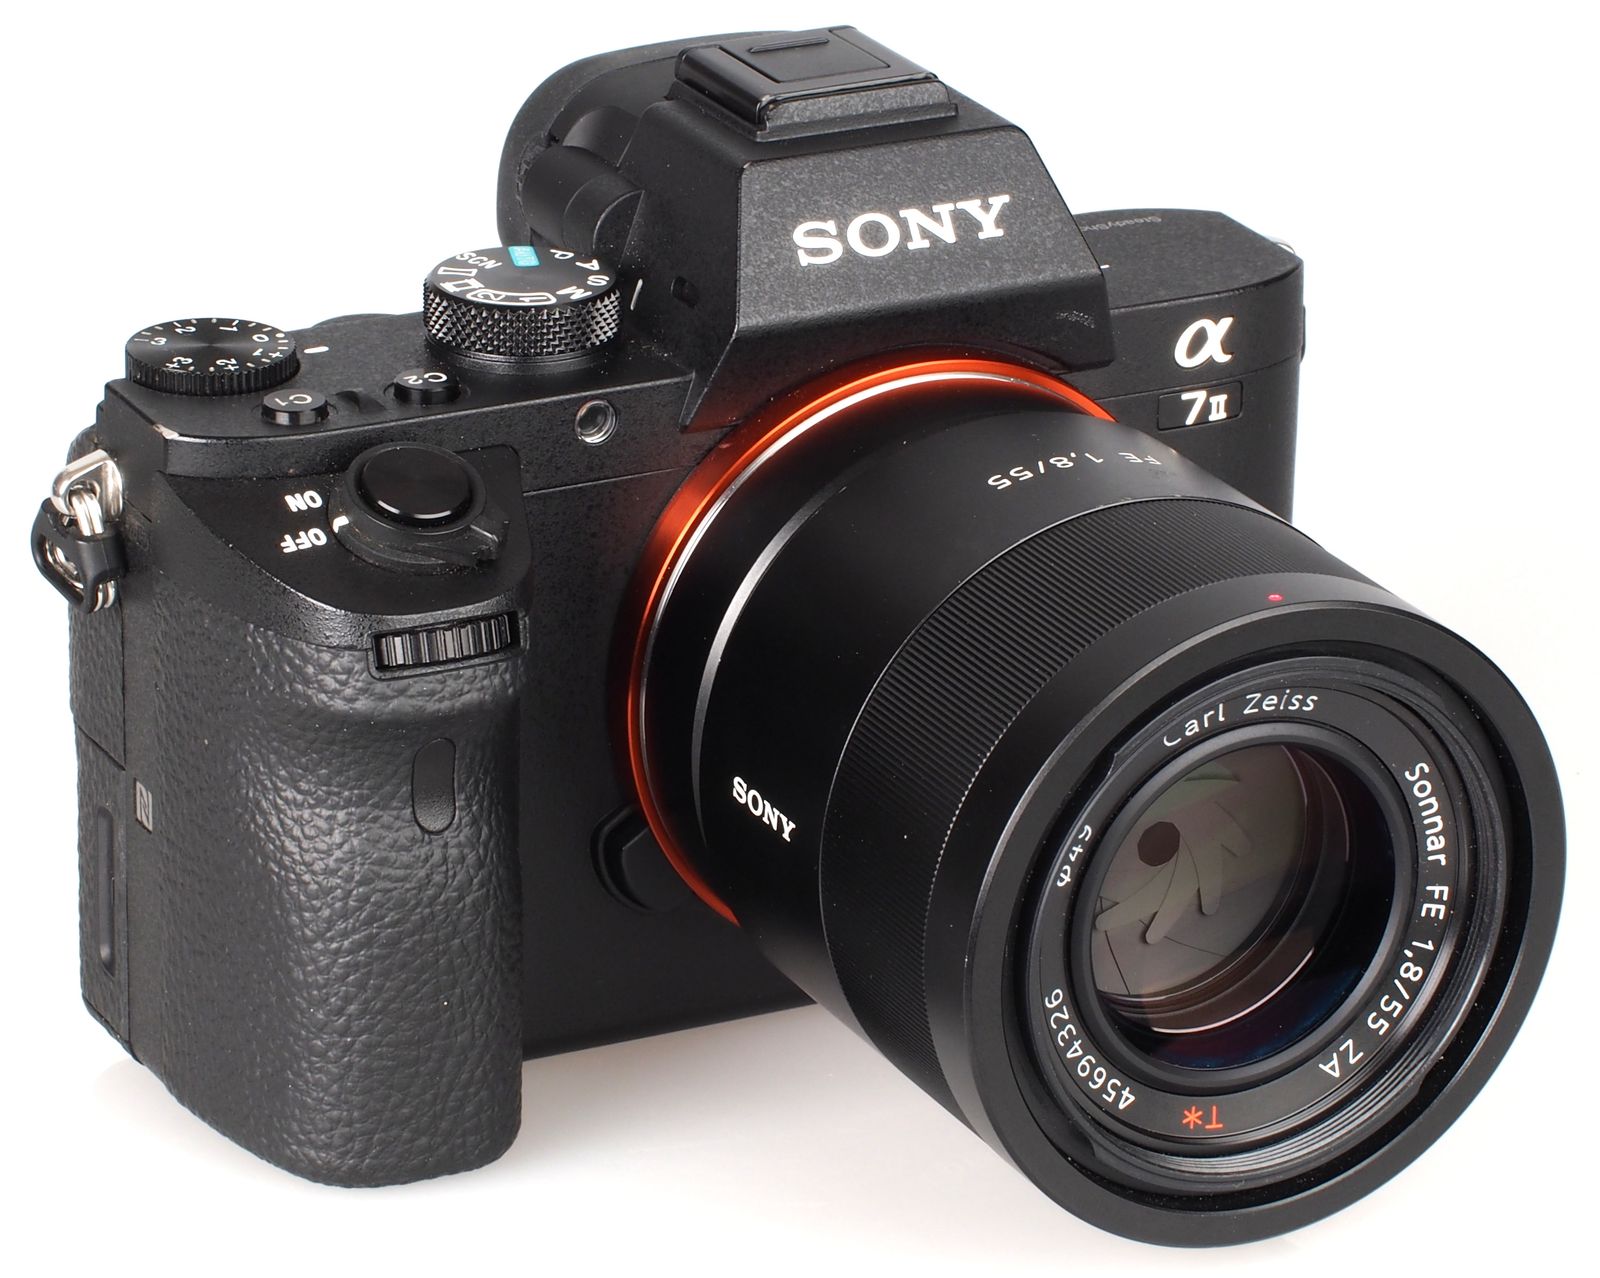 Sony Alpha A7 Mark II ILCE-7M2 Review